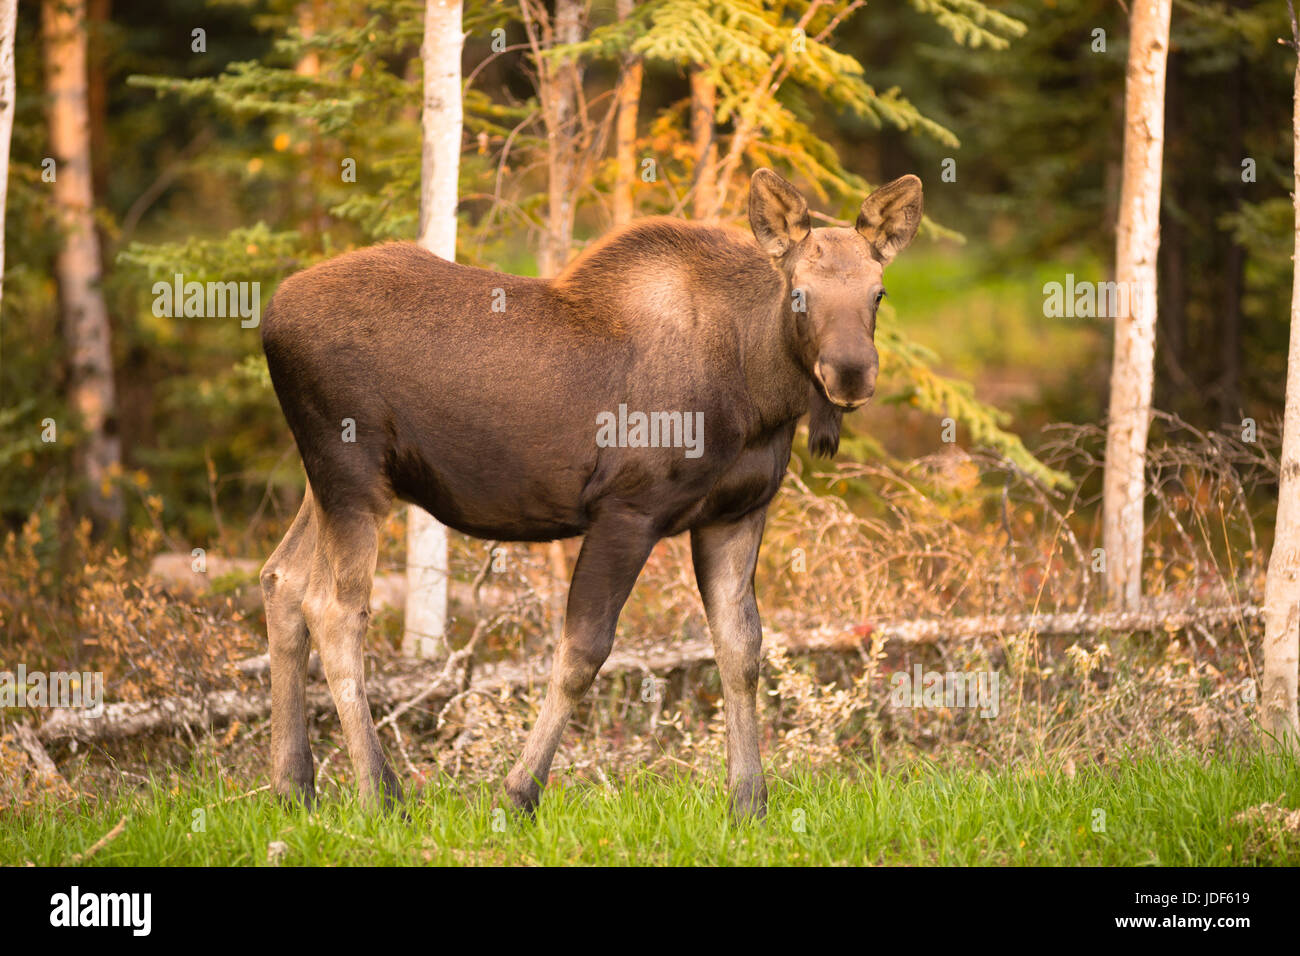 A young moose calf takes a moment to check my position while grazing Stock Photo